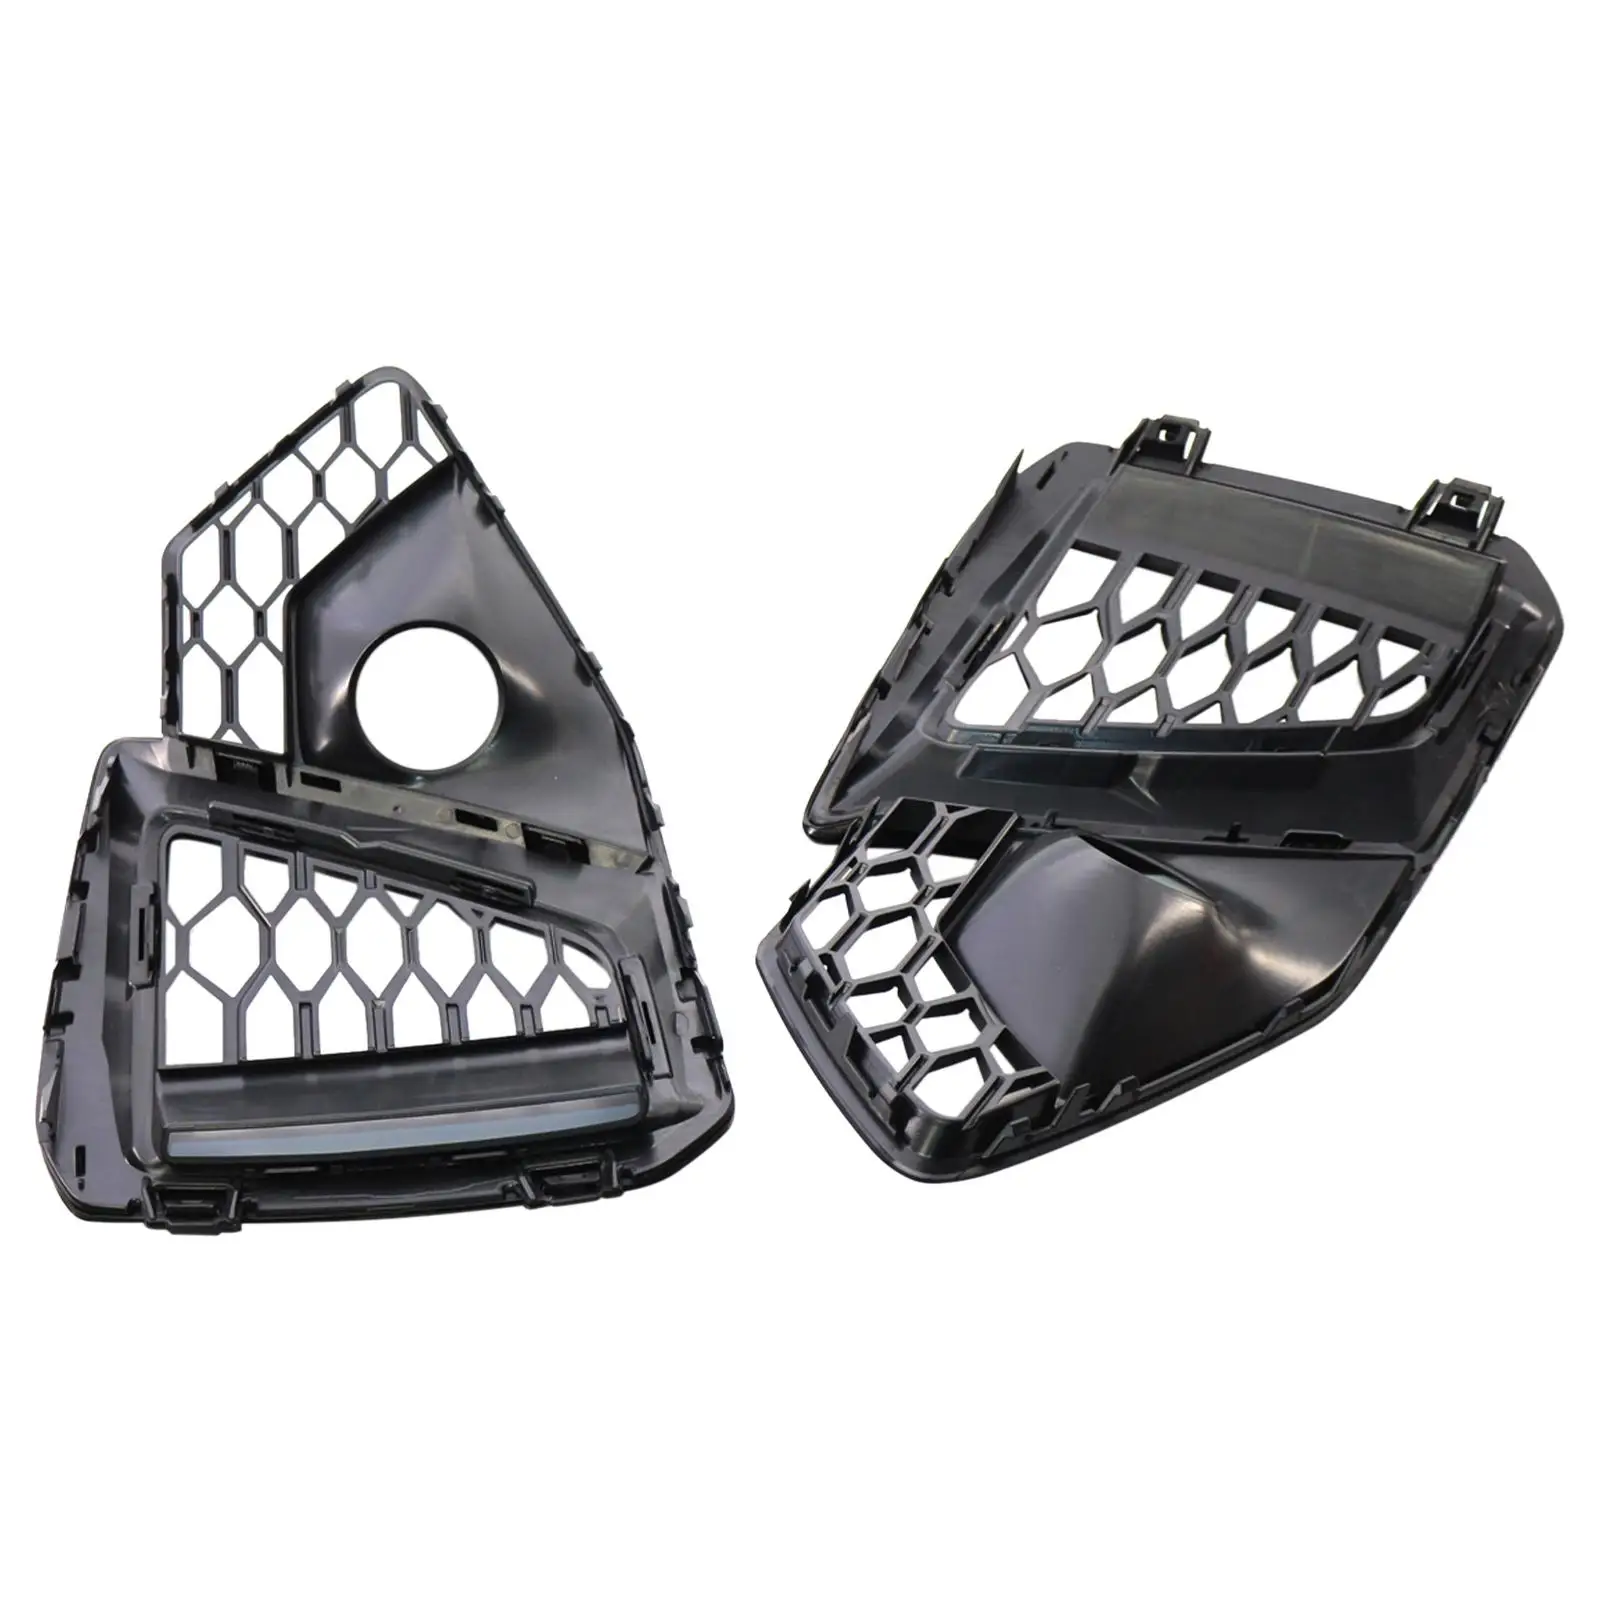 Pair of Fog Lamp Grille Assembly for S-Line Bumper Replacement Grill Cover for Audi S4 A4 20-2022 8WD807682M 8WD807681M